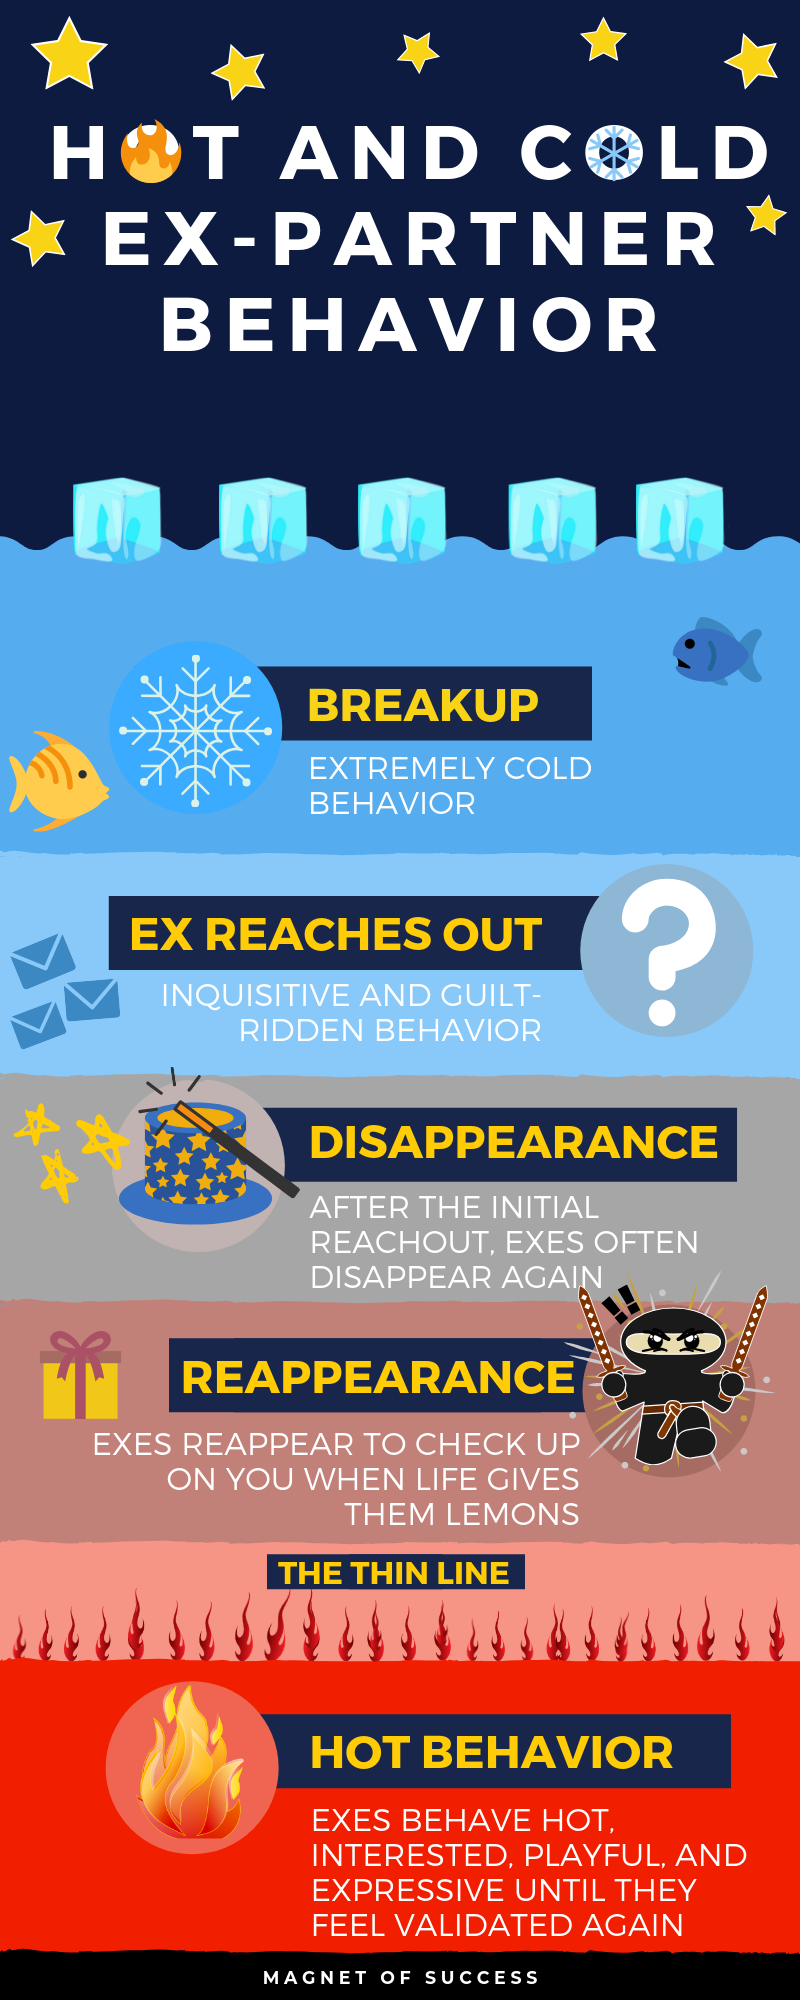 Hot and cold ex behavior